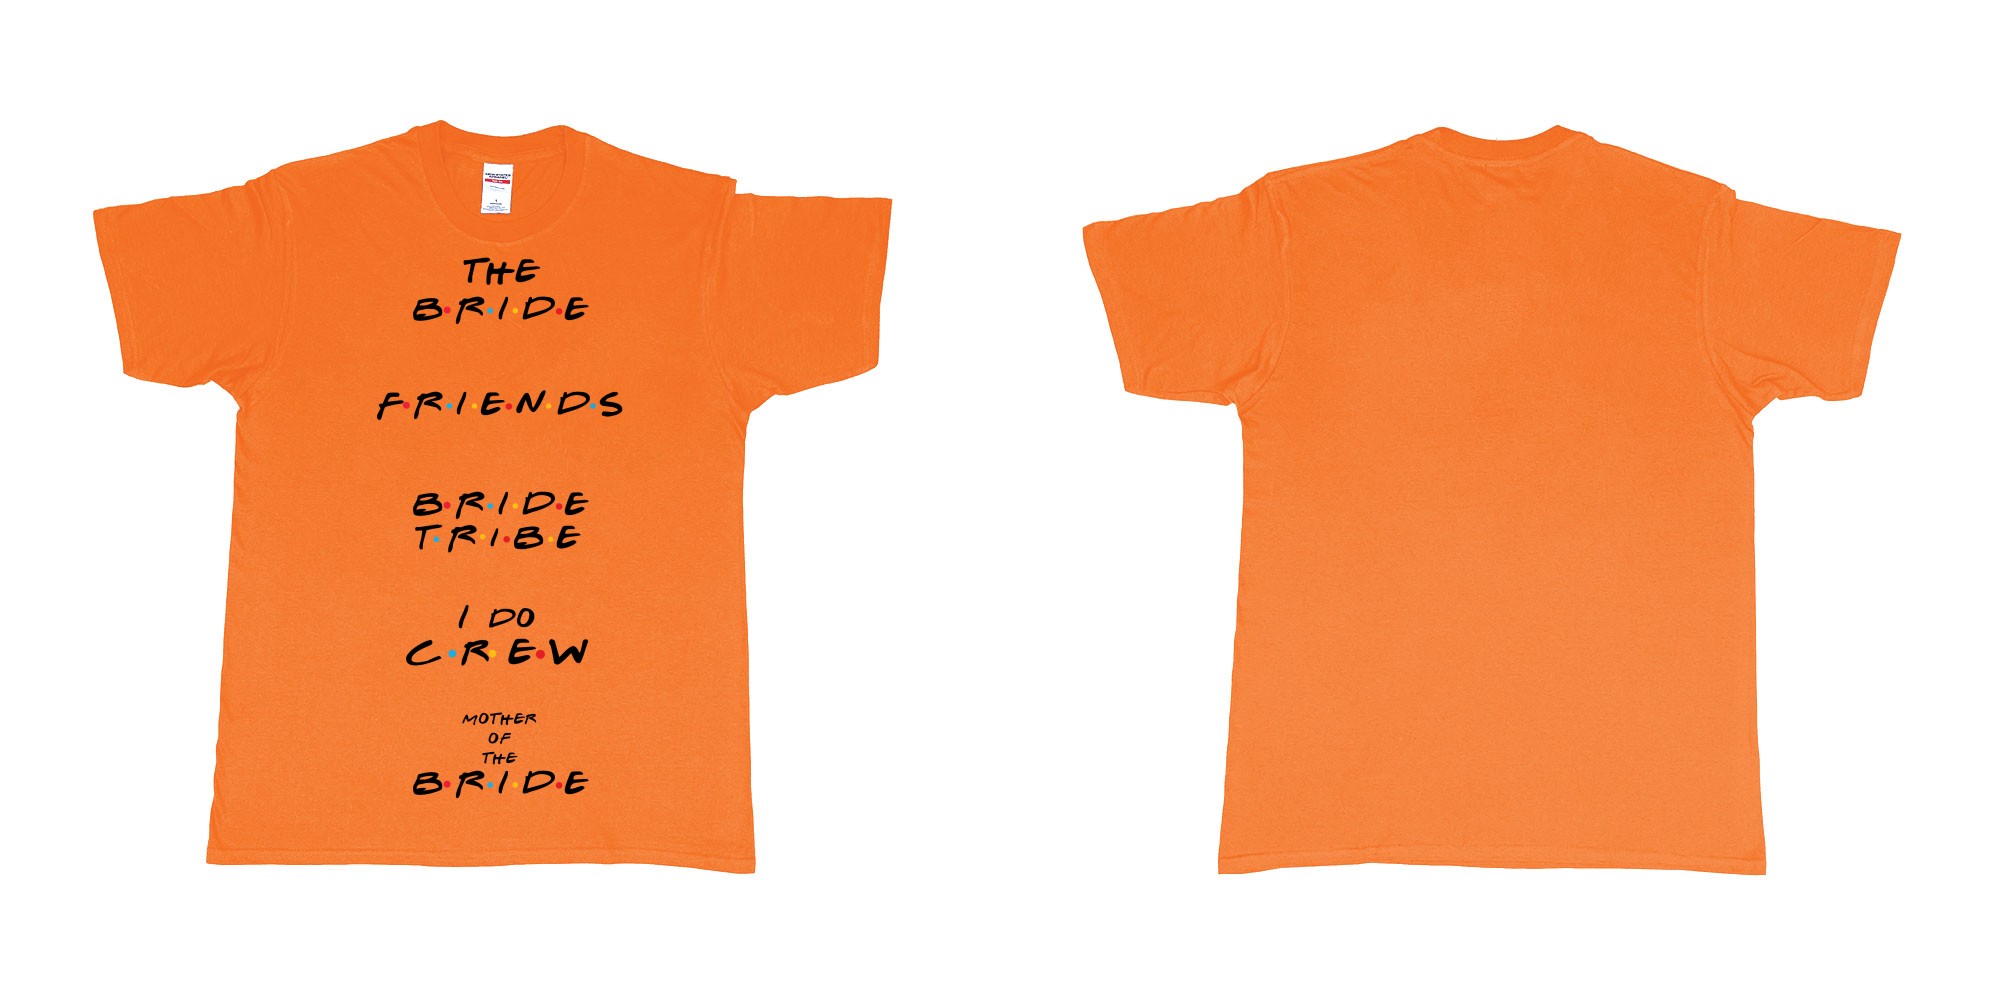 Custom tshirt design TPW friends in fabric color orange choice your own text made in Bali by The Pirate Way